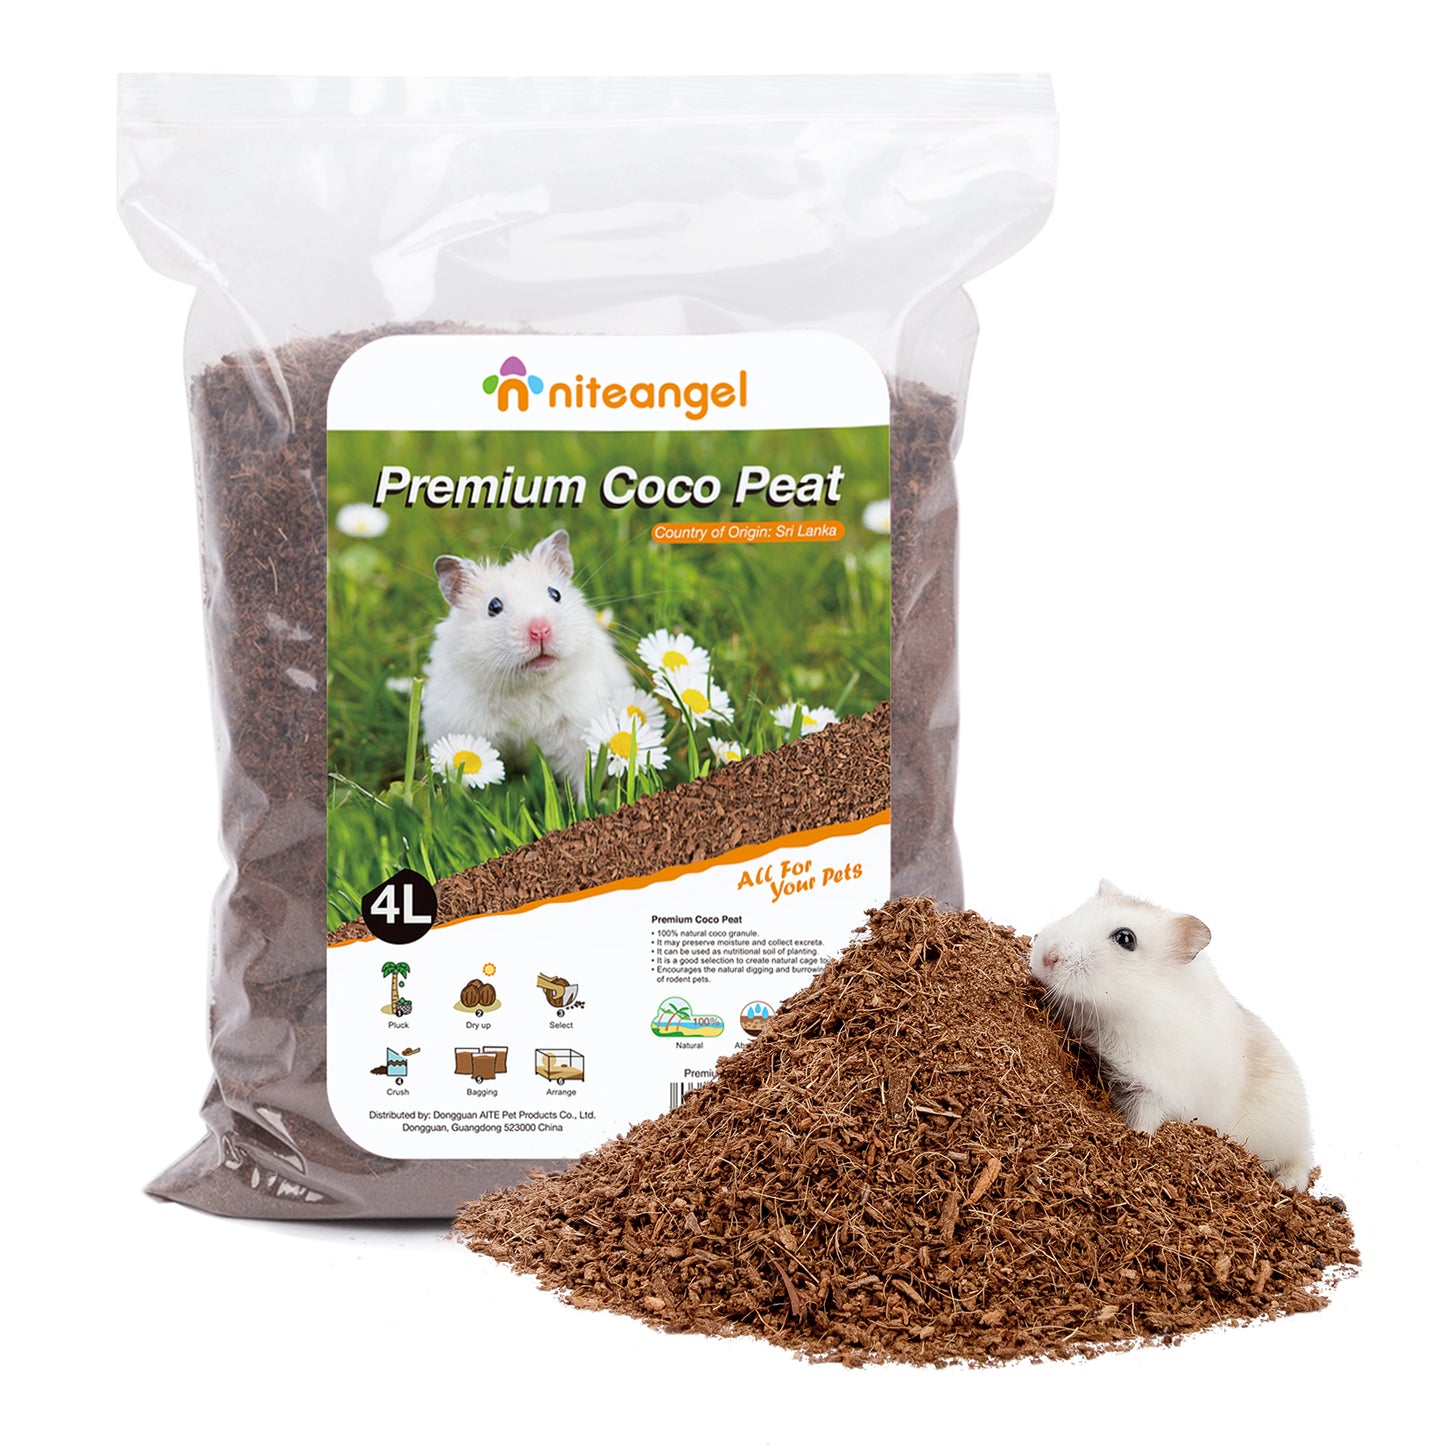 Niteangel Natural Coco/Cork Hamster Bedding Pet Litter for Dwarf Syrian Hamsters, Gerbils, mices, Degus or Other Small Animal